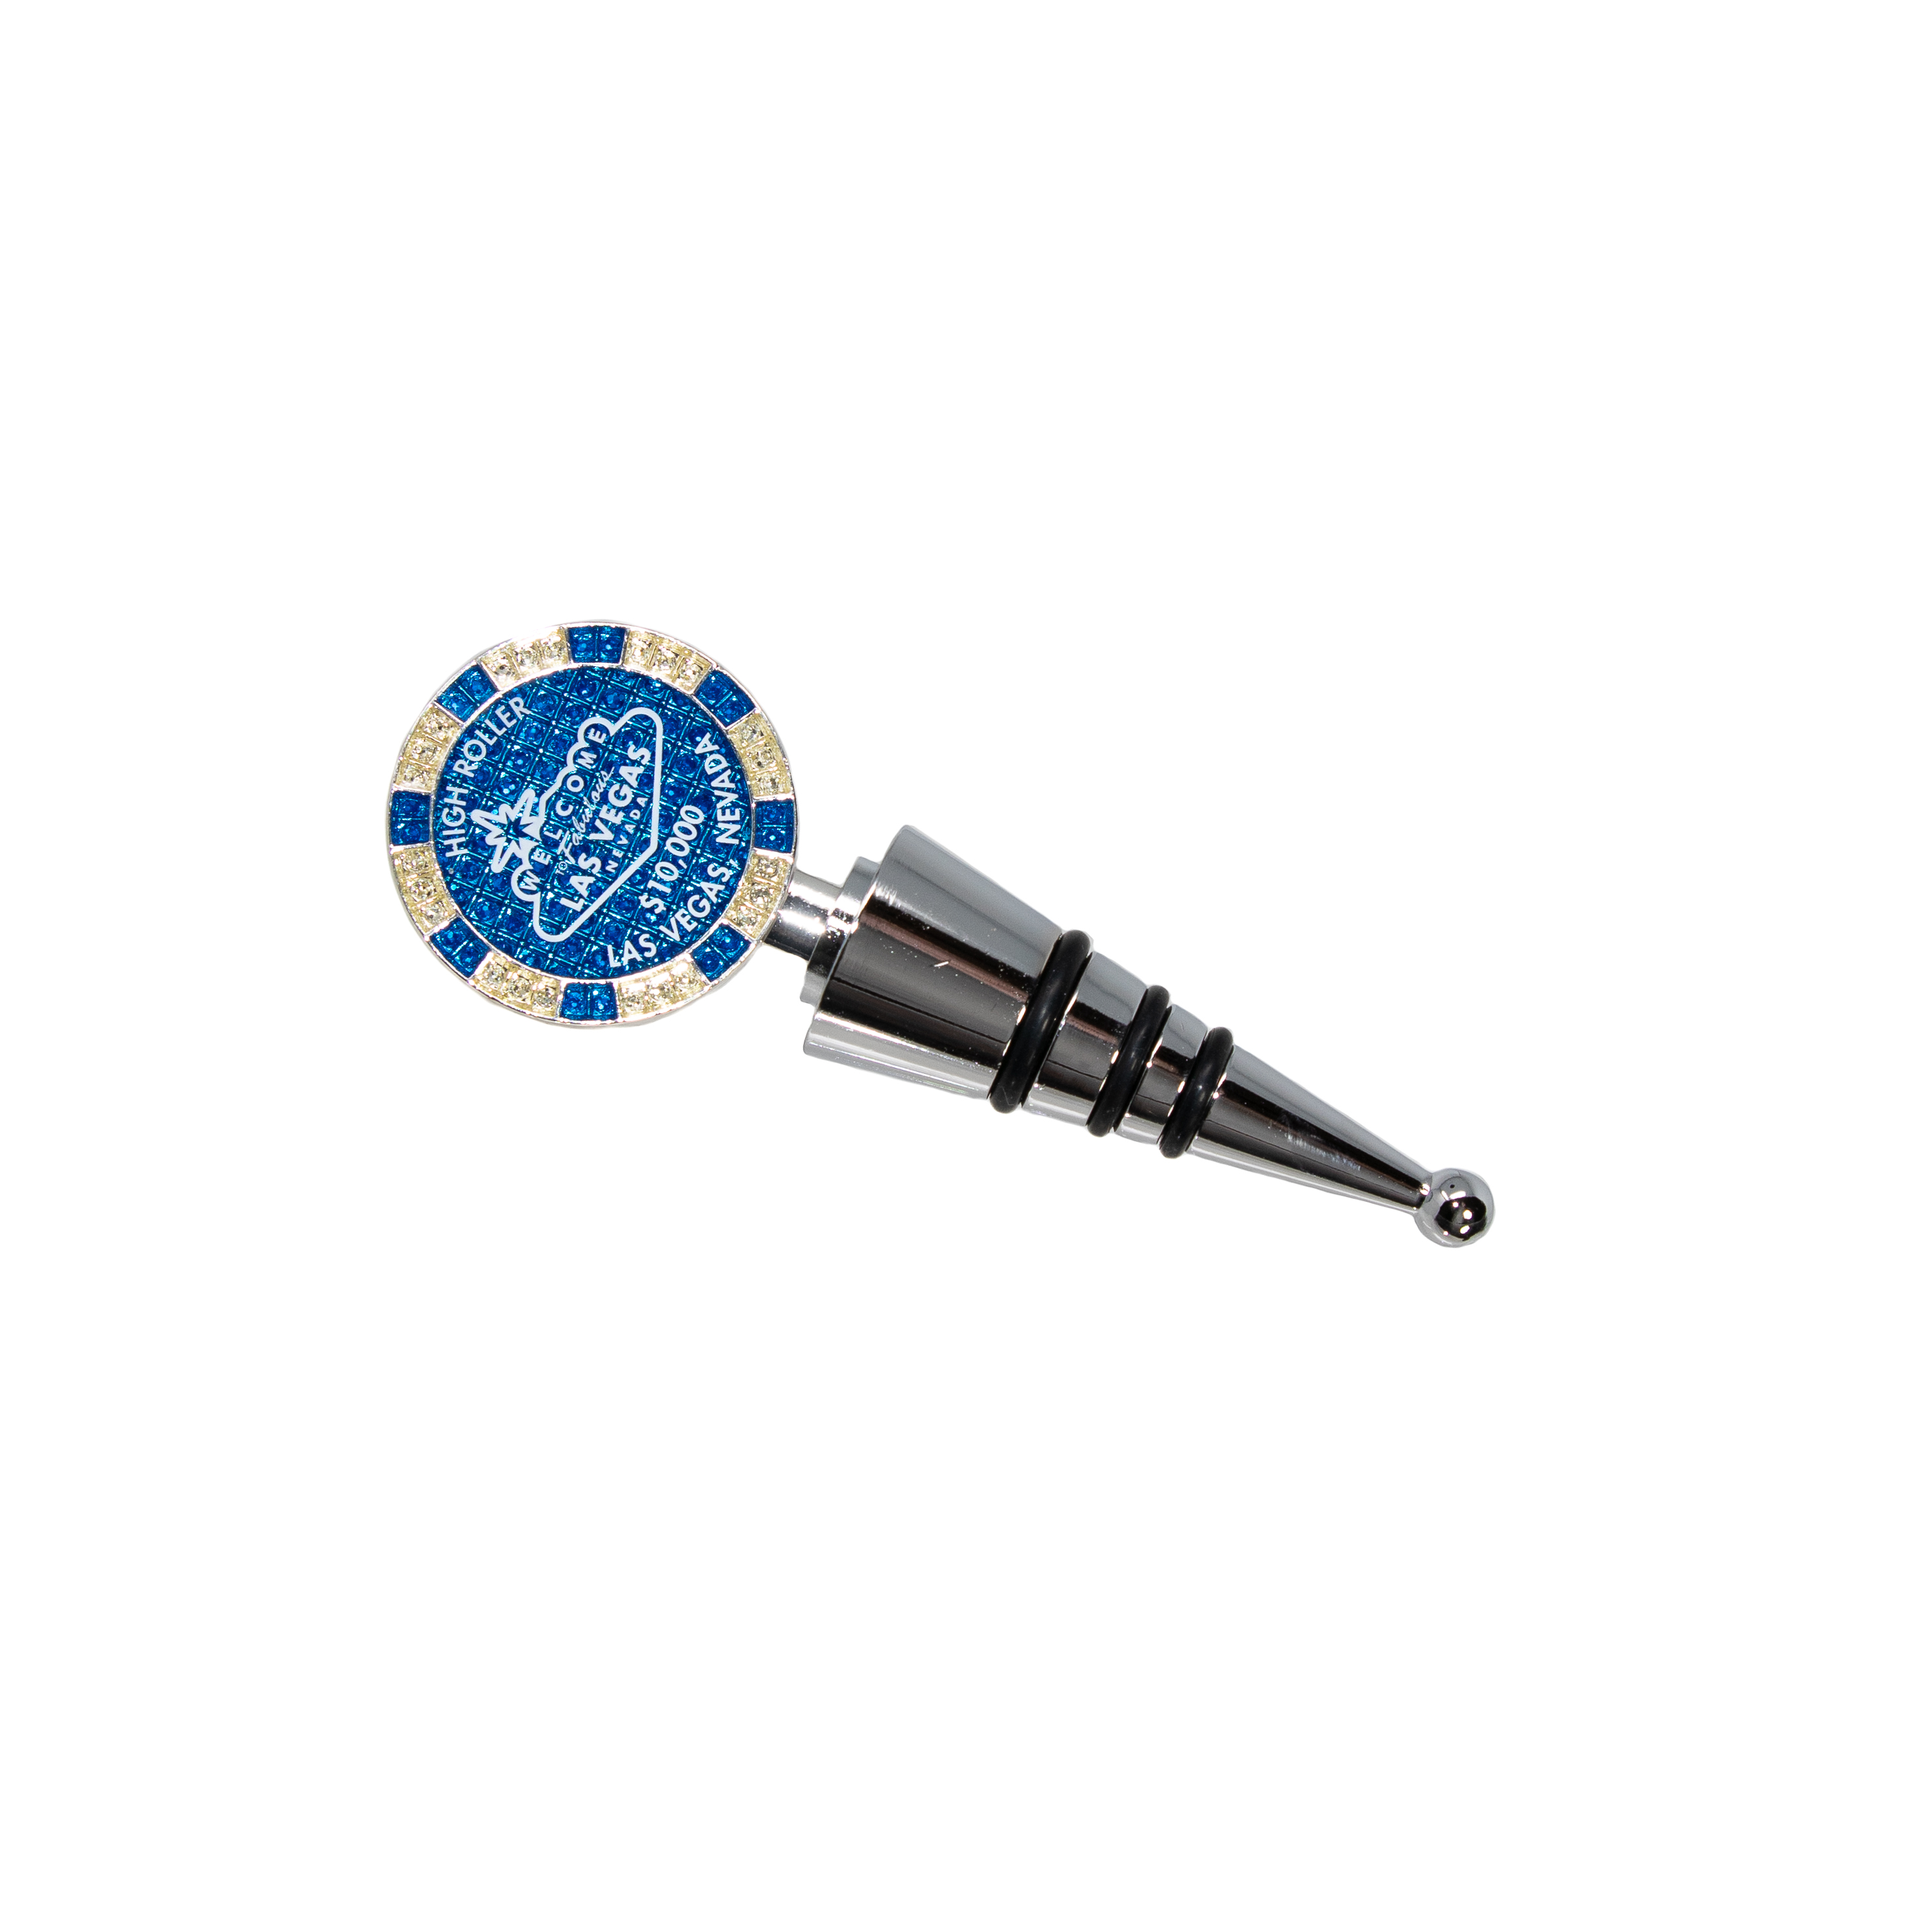 $10,000 Las Vegas Poker Chip Wine Stopper - Welcome to Las Vegas Sign Poker Chip Wine Stopper with Rubber Seal (Silver and Blue) - image 2 of 5